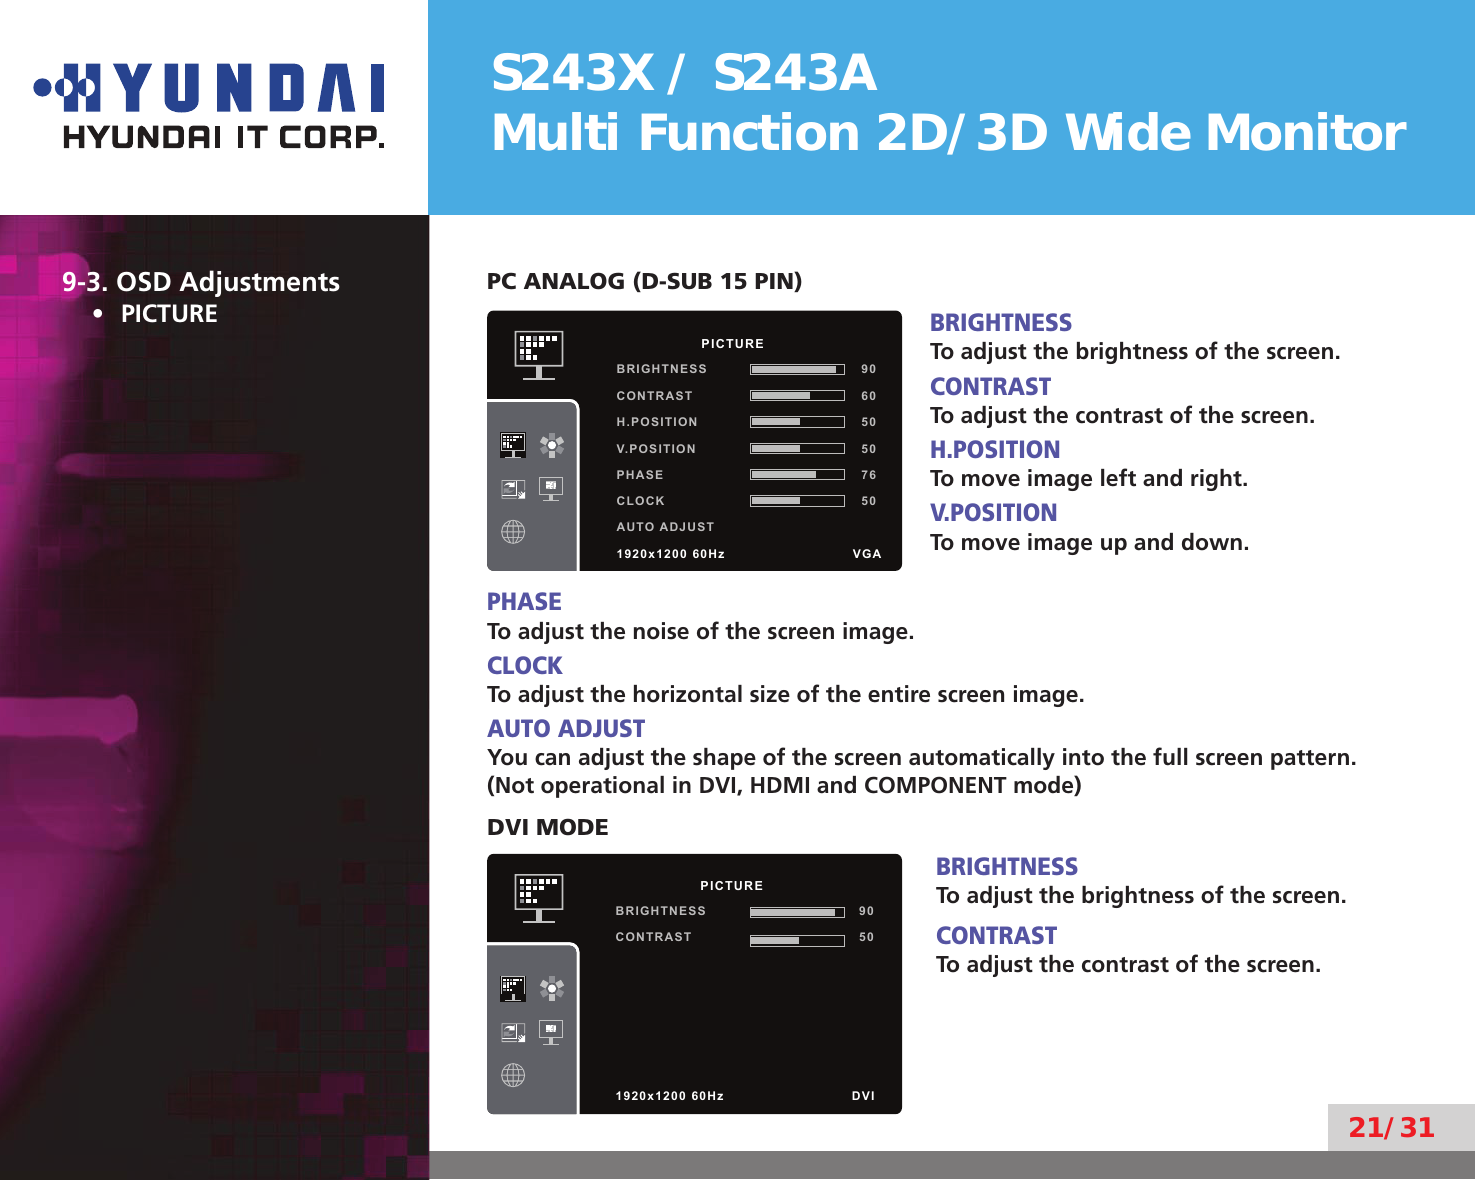 S243X / S243AMulti Function 2D/3D Wide Monitor21/319-3. OSD AdjustmentsPICTURE• PC ANALOG (D-SUB 15 PIN)BRIGHTNESSTo adjust the brightness of the screen.CONTRASTTo adjust the contrast of the screen.H.POSITIONTo move image left and right.V.POSITIONTo move image up and down.PHASETo adjust the noise of the screen image.CLOCKTo adjust the horizontal size of the entire screen image.AUTO ADJUSTYou can adjust the shape of the screen automatically into the full screen pattern.(Not operational in DVI, HDMI and COMPONENT mode)DVI MODEBRIGHTNESSTo adjust the brightness of the screen.CONTRASTTo adjust the contrast of the screen.          PICTUREBRIGHTNESS 90CONTRAST 60H.POSITION 50V.POSITION 50PHASE 76CLOCK 50AUTO ADJUST1920x1200 60Hz               VGA          PICTUREBRIGHTNESS 90CONTRAST 501920x1200 60Hz               DVI